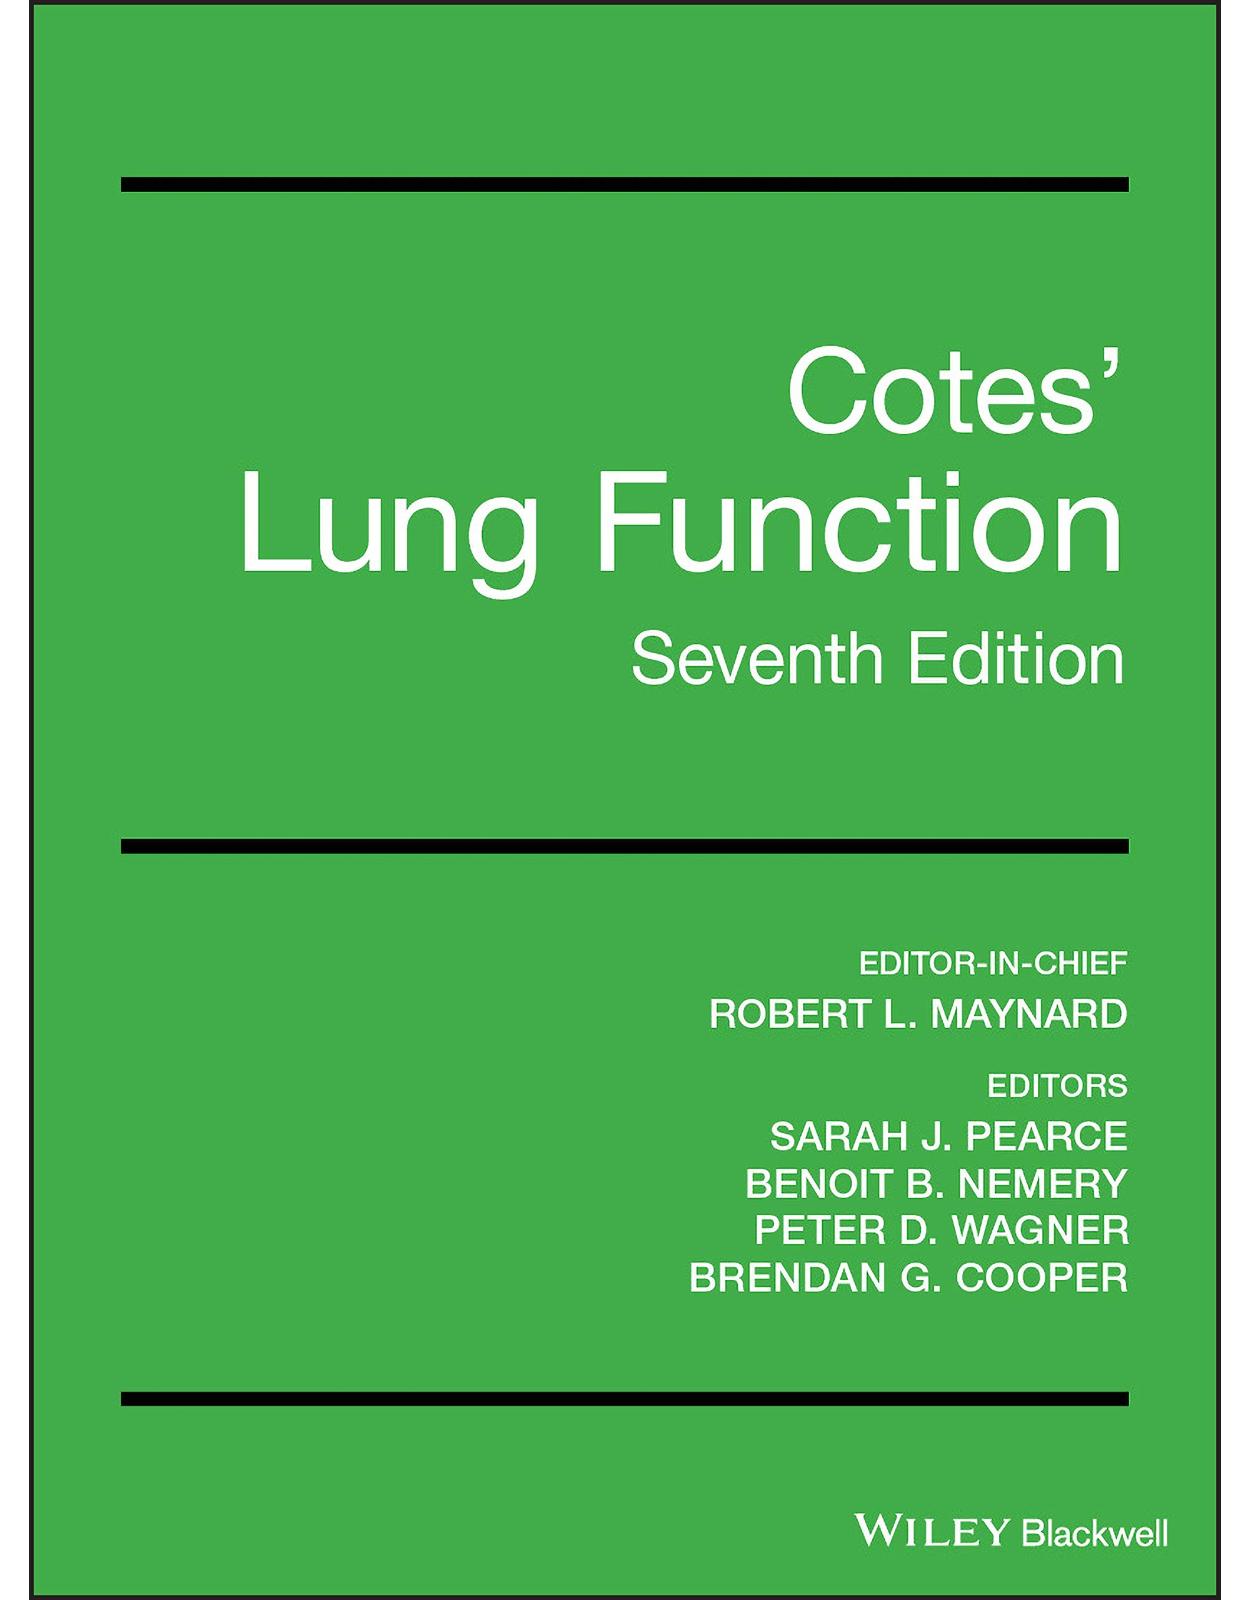 Lung Function 